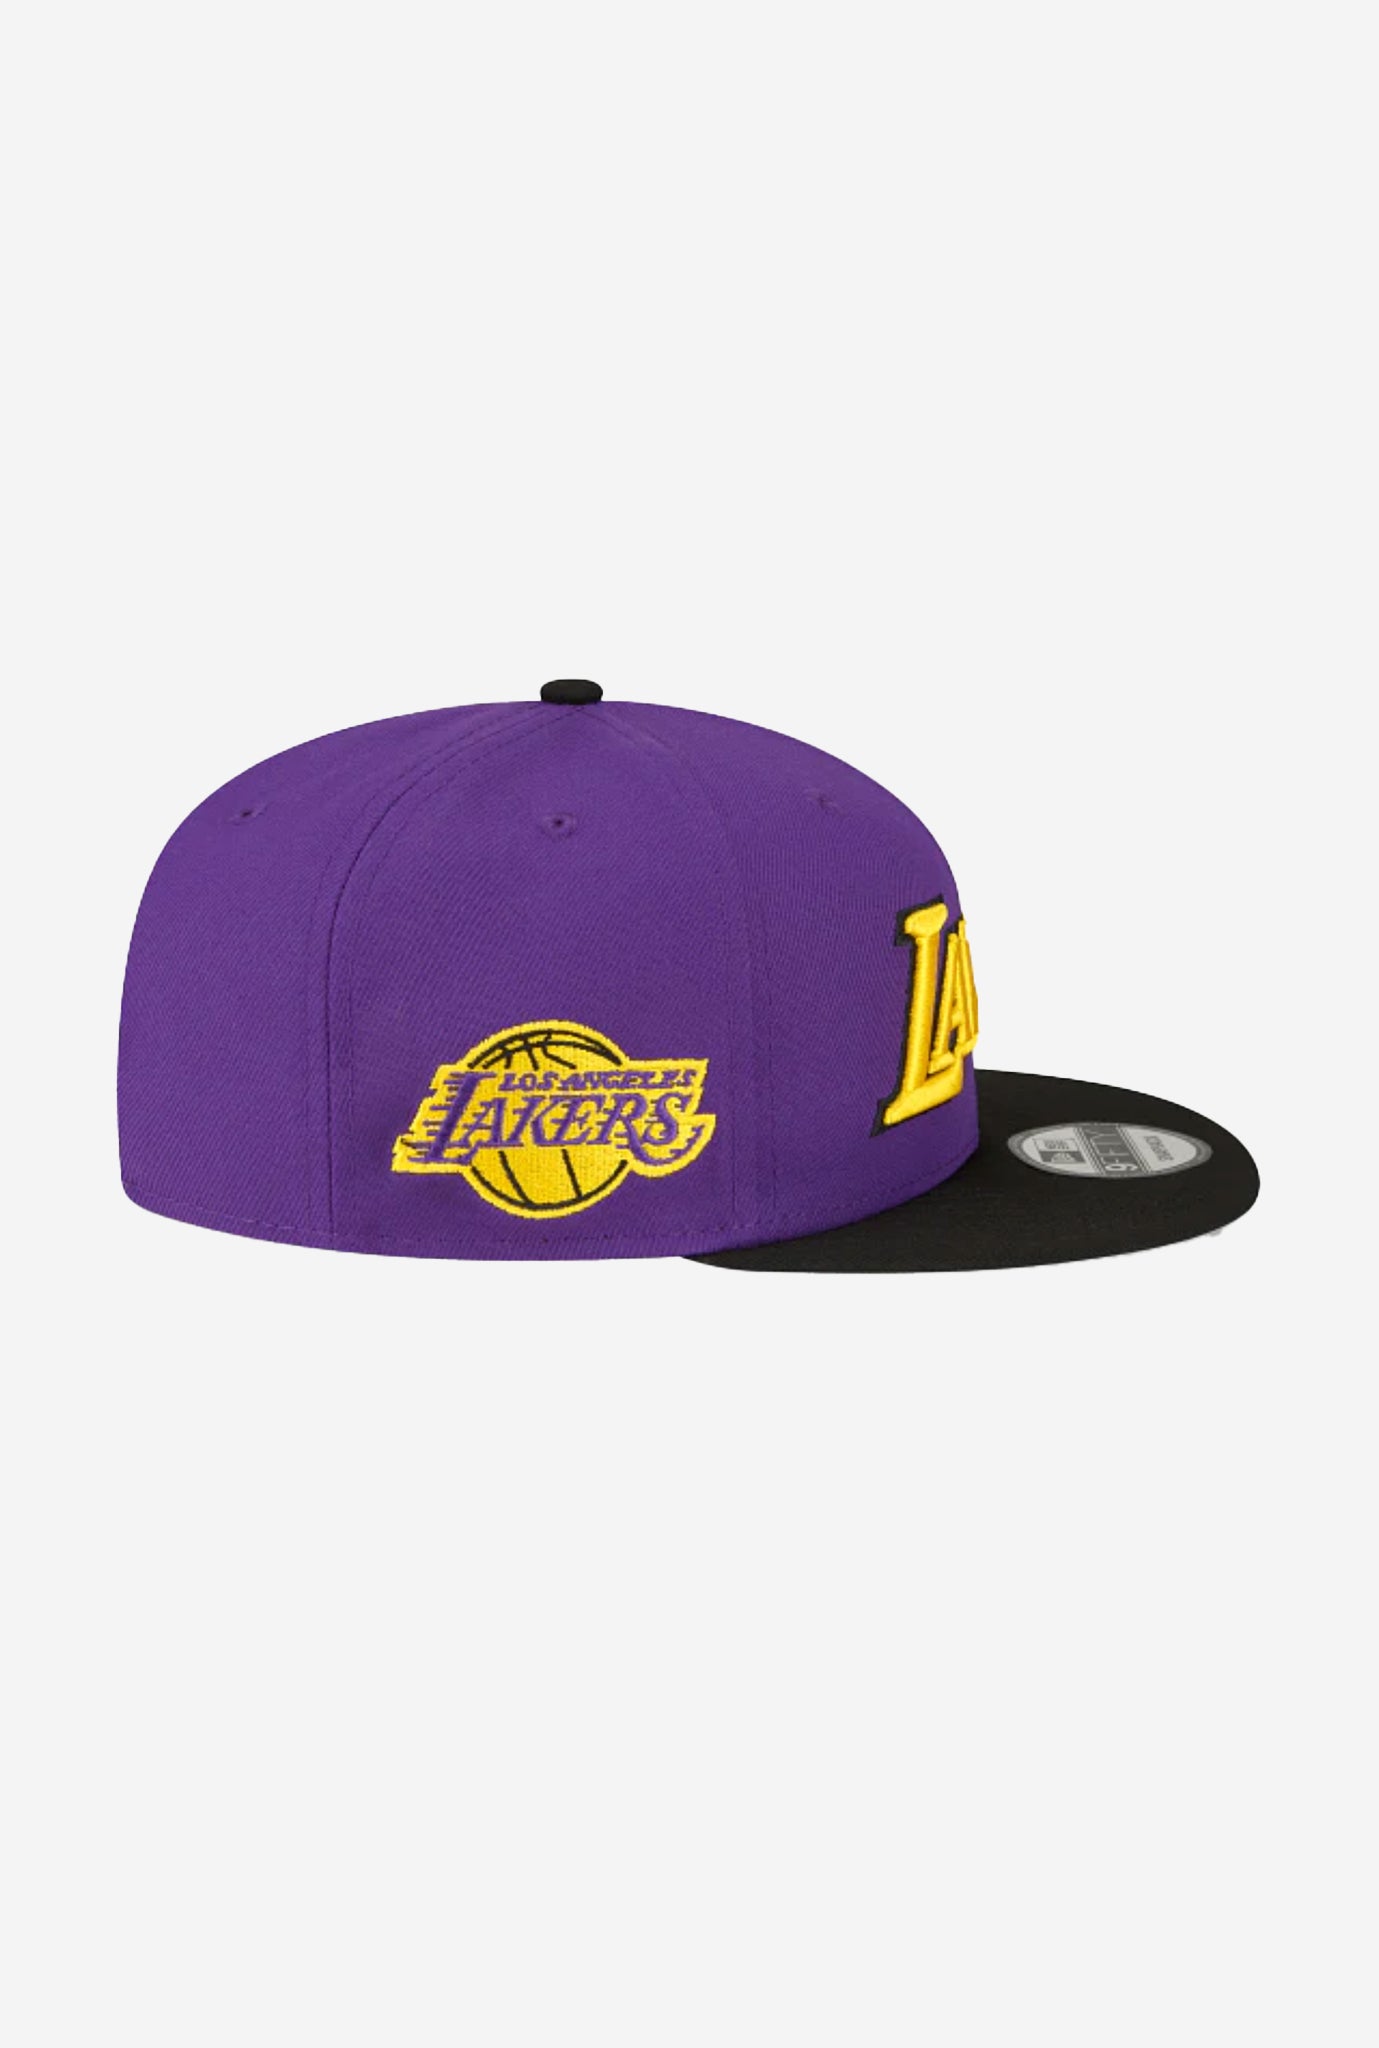 Los Angeles Lakers Statement Edition 9FIFTY